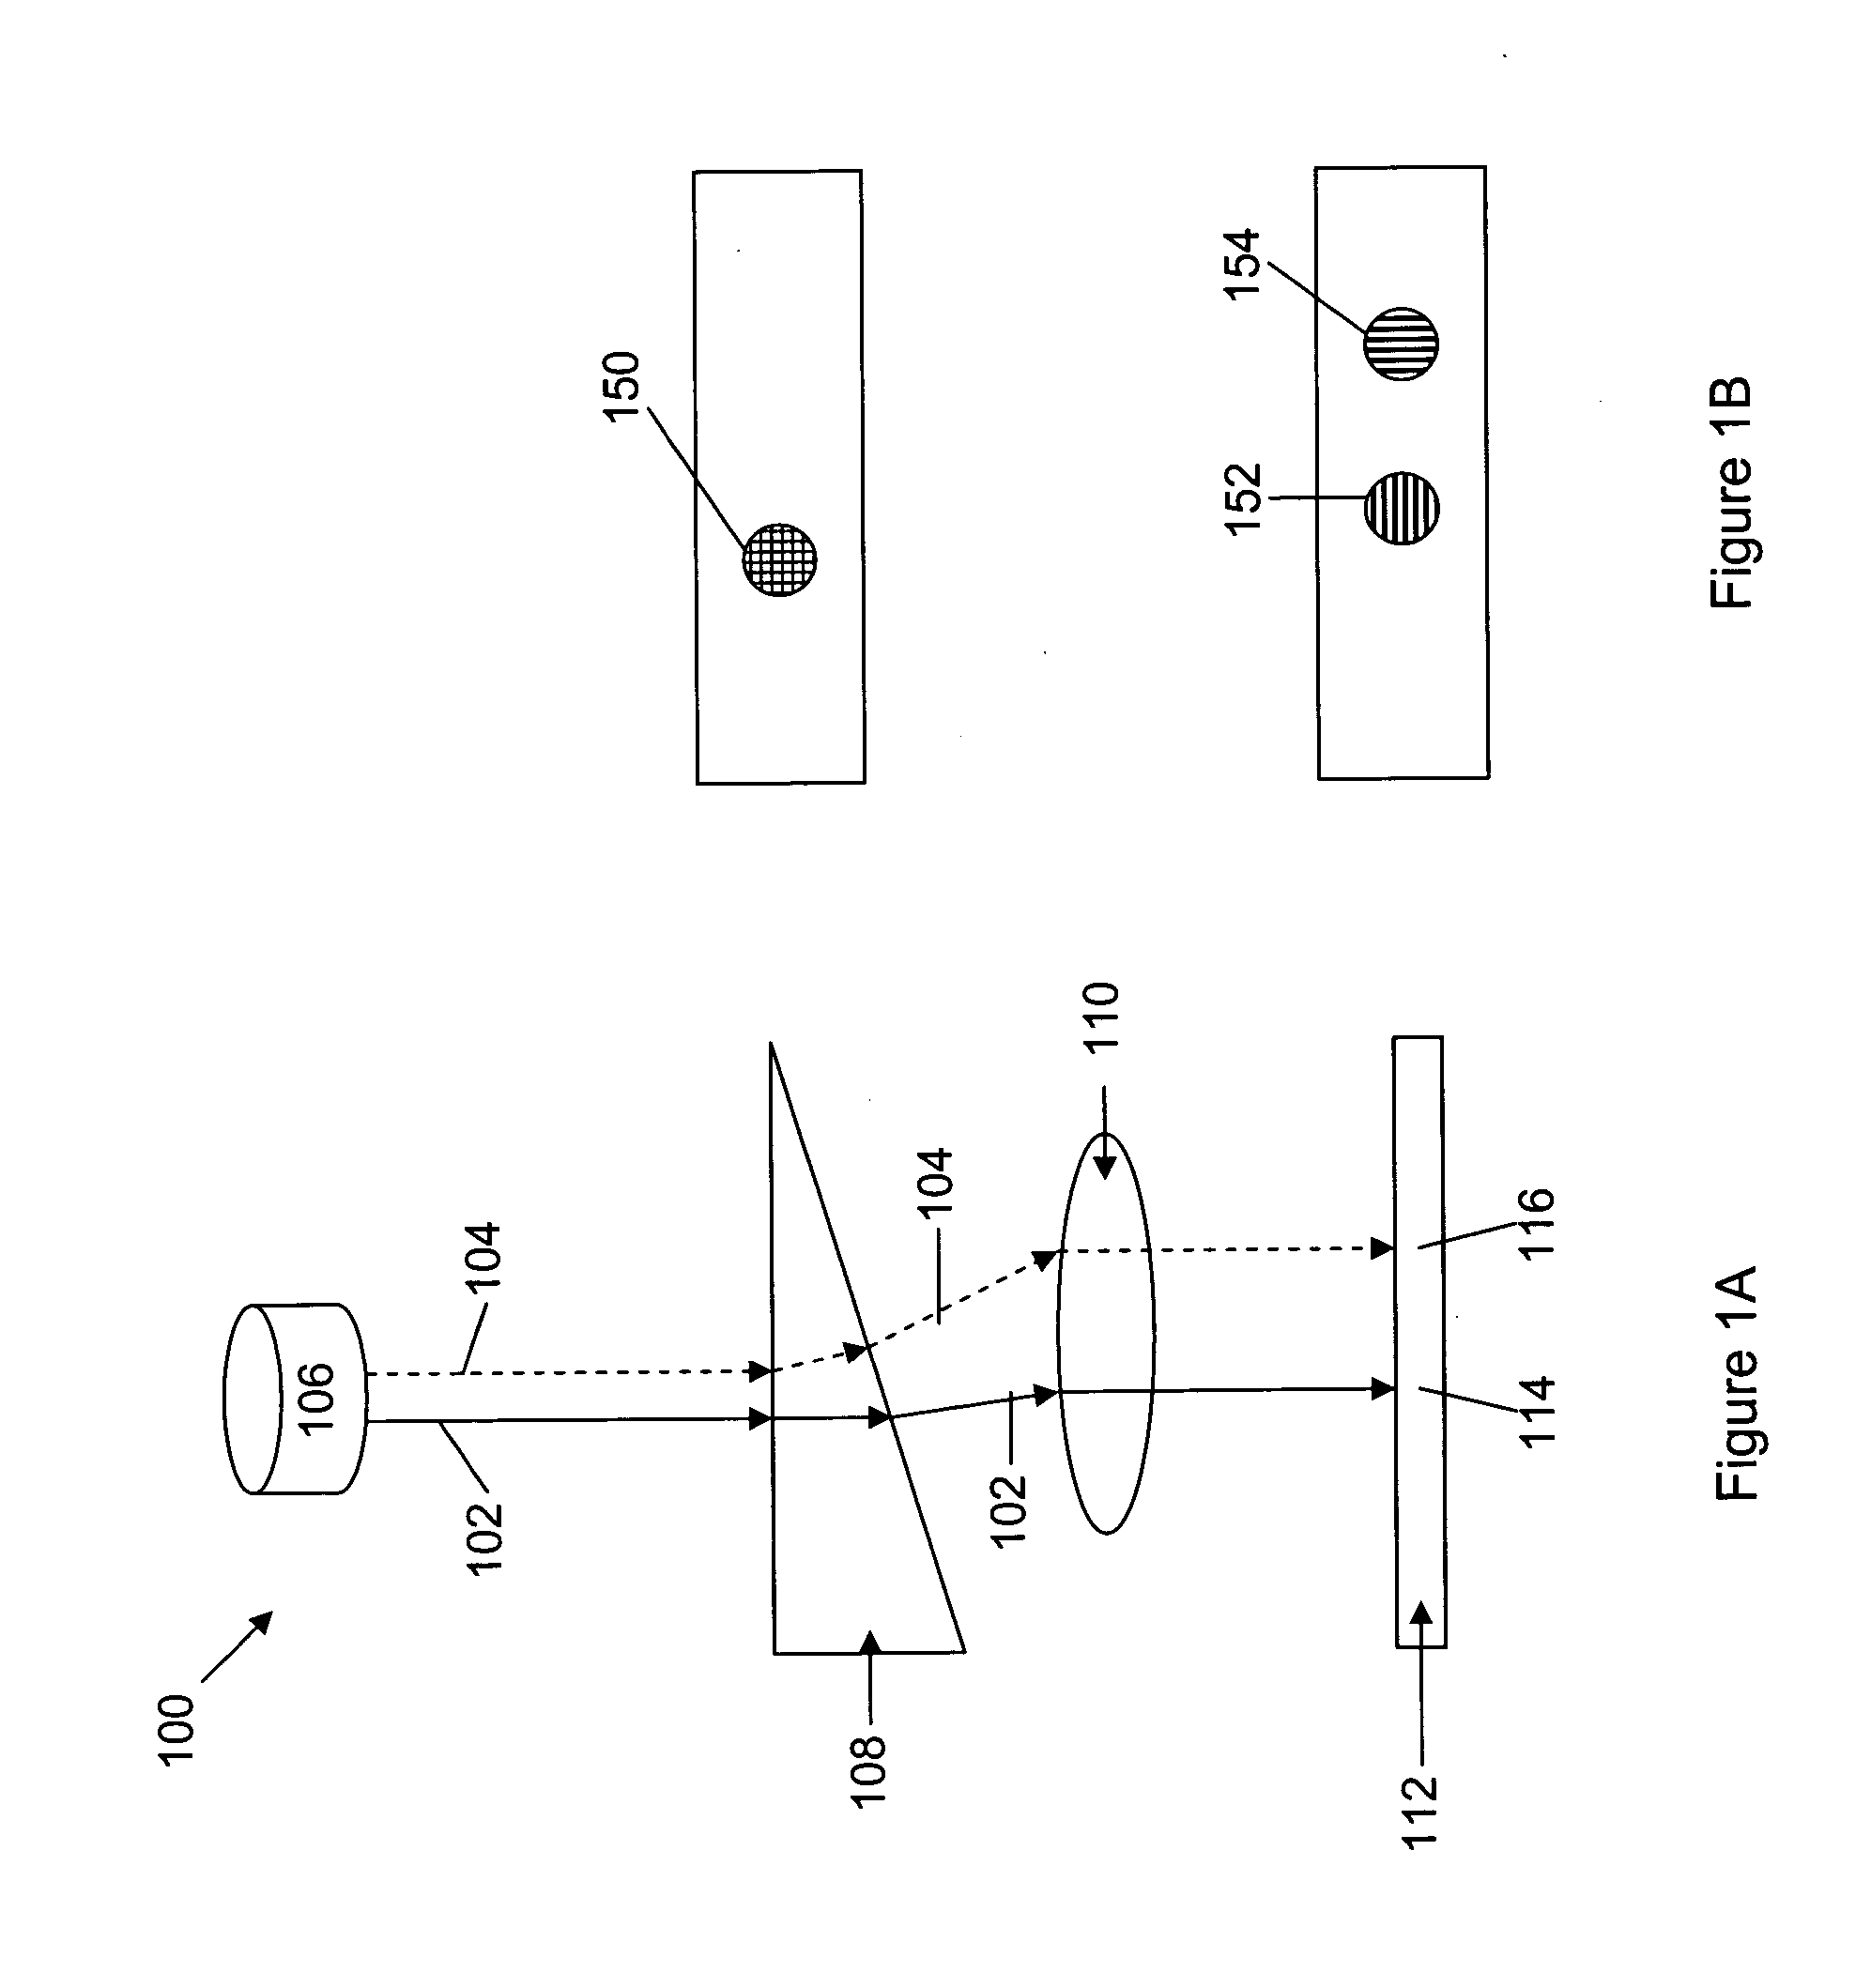 Methods and systems for monitoring multiple optical signals from a single source